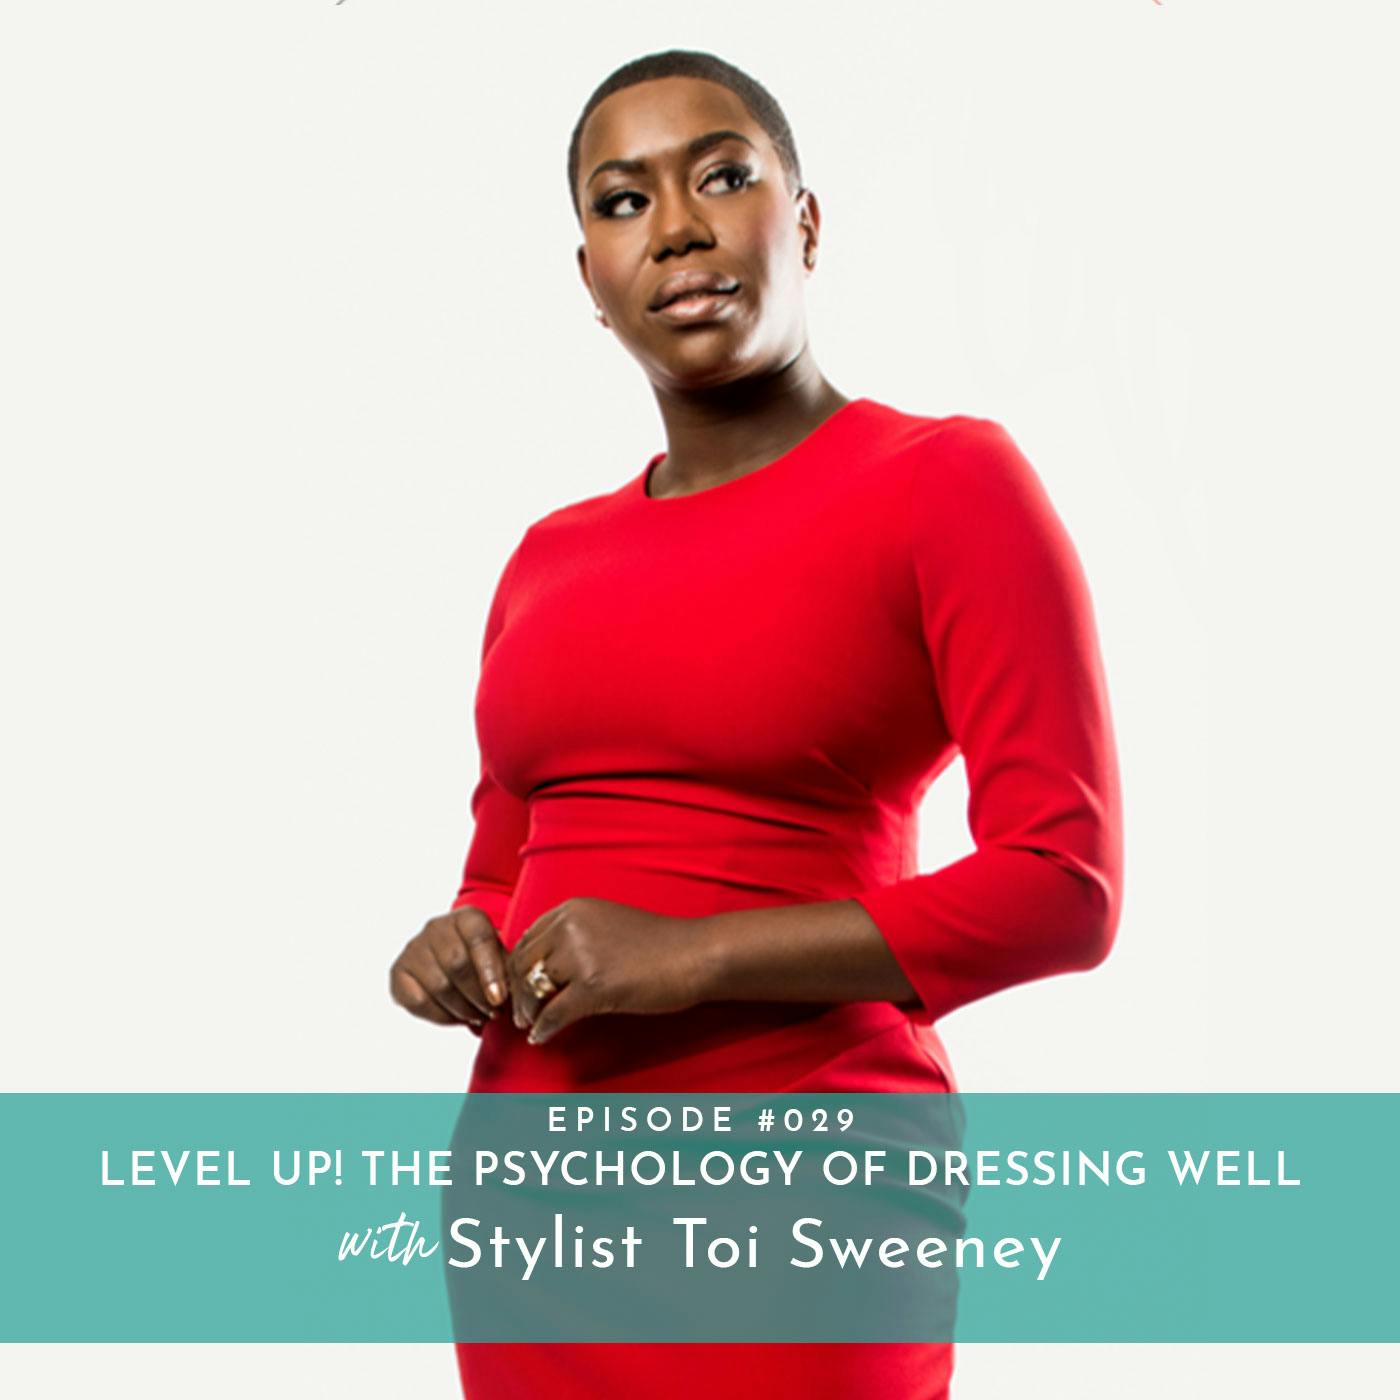 Level Up!  The Psychology of Dressing Well with Stylist Toi Sweeney